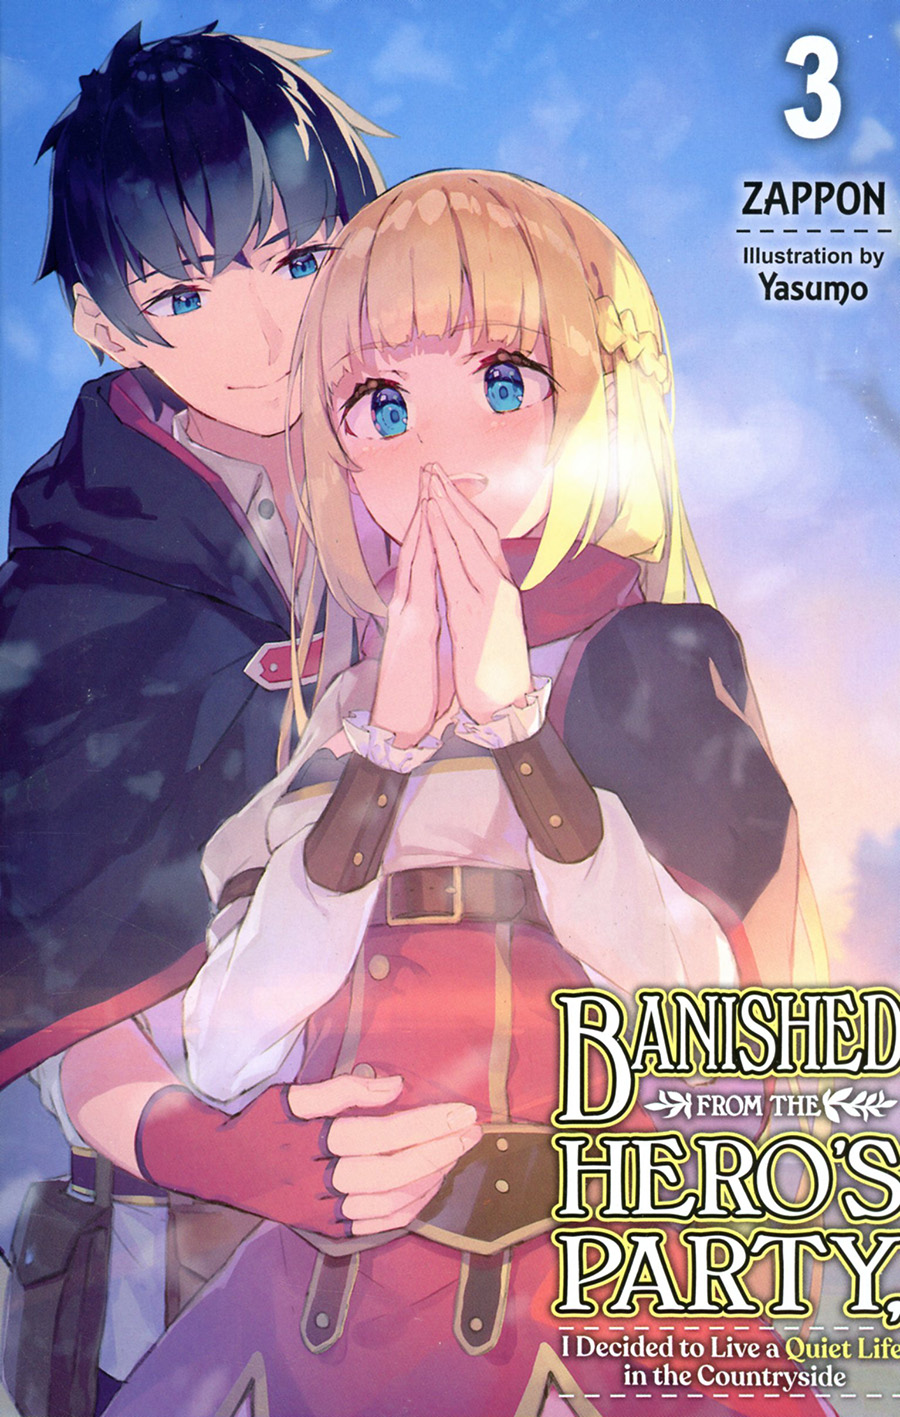 Banished From The Heros Party I Decided To Live A Quiet Life In The Countryside Light Novel Vol 3 TP